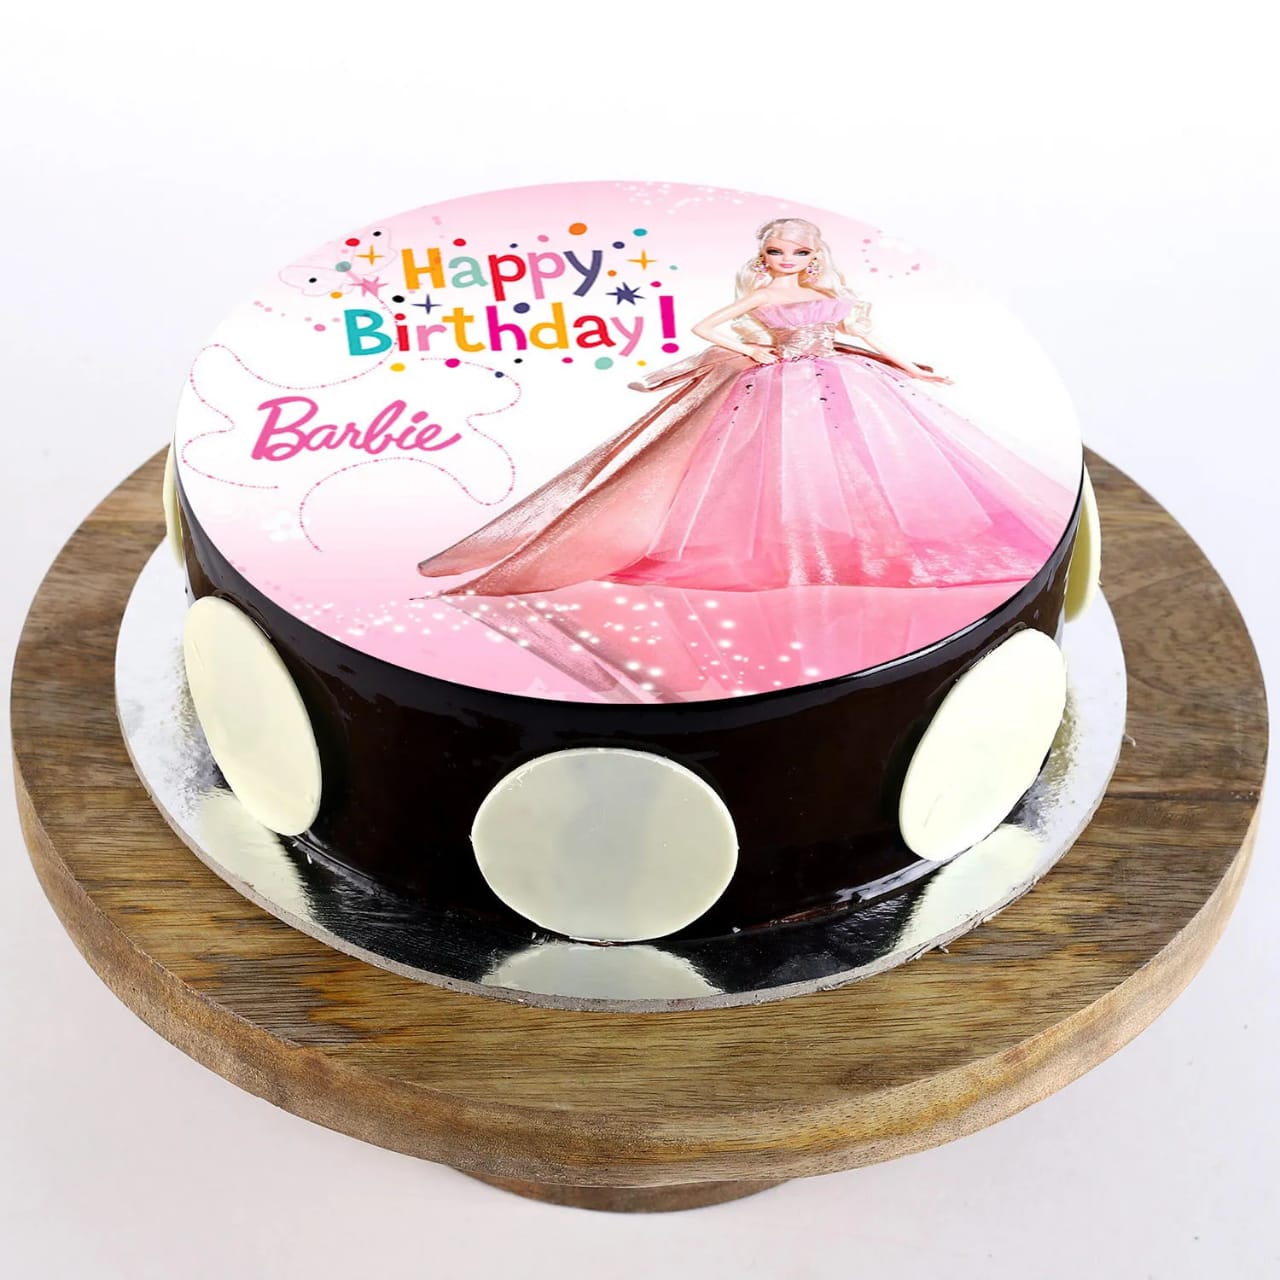 Barbie Wishes Round Edible Cake Image – Build a Birthday NZ